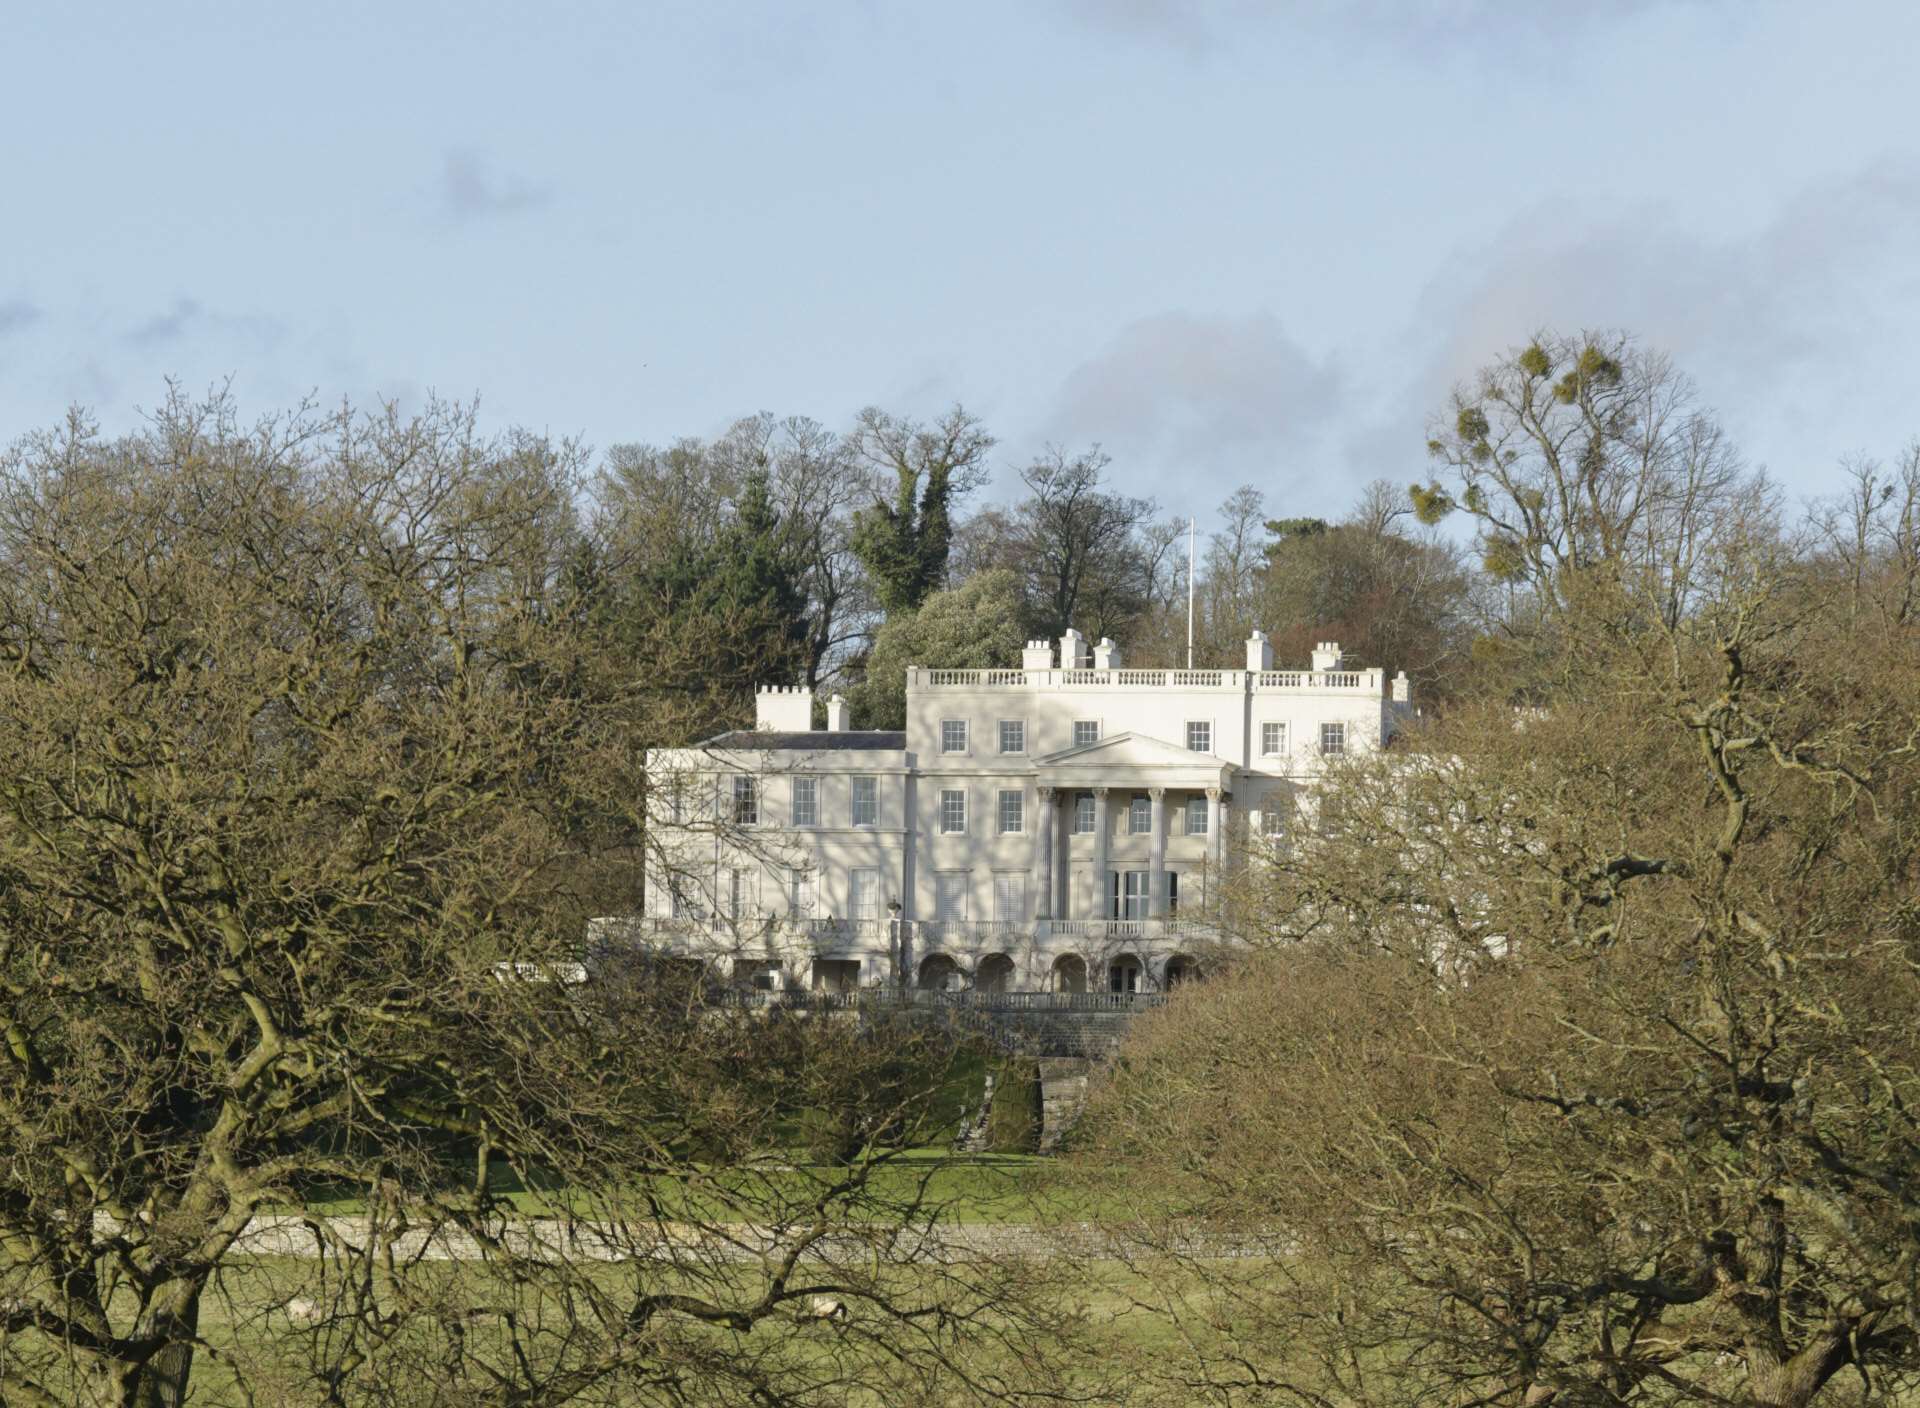 The grand country manor, as seen from surrounding countryside, is a well-recognised feature. Sitting above the park, it is in separate ownership and is not part of the estate being sold.